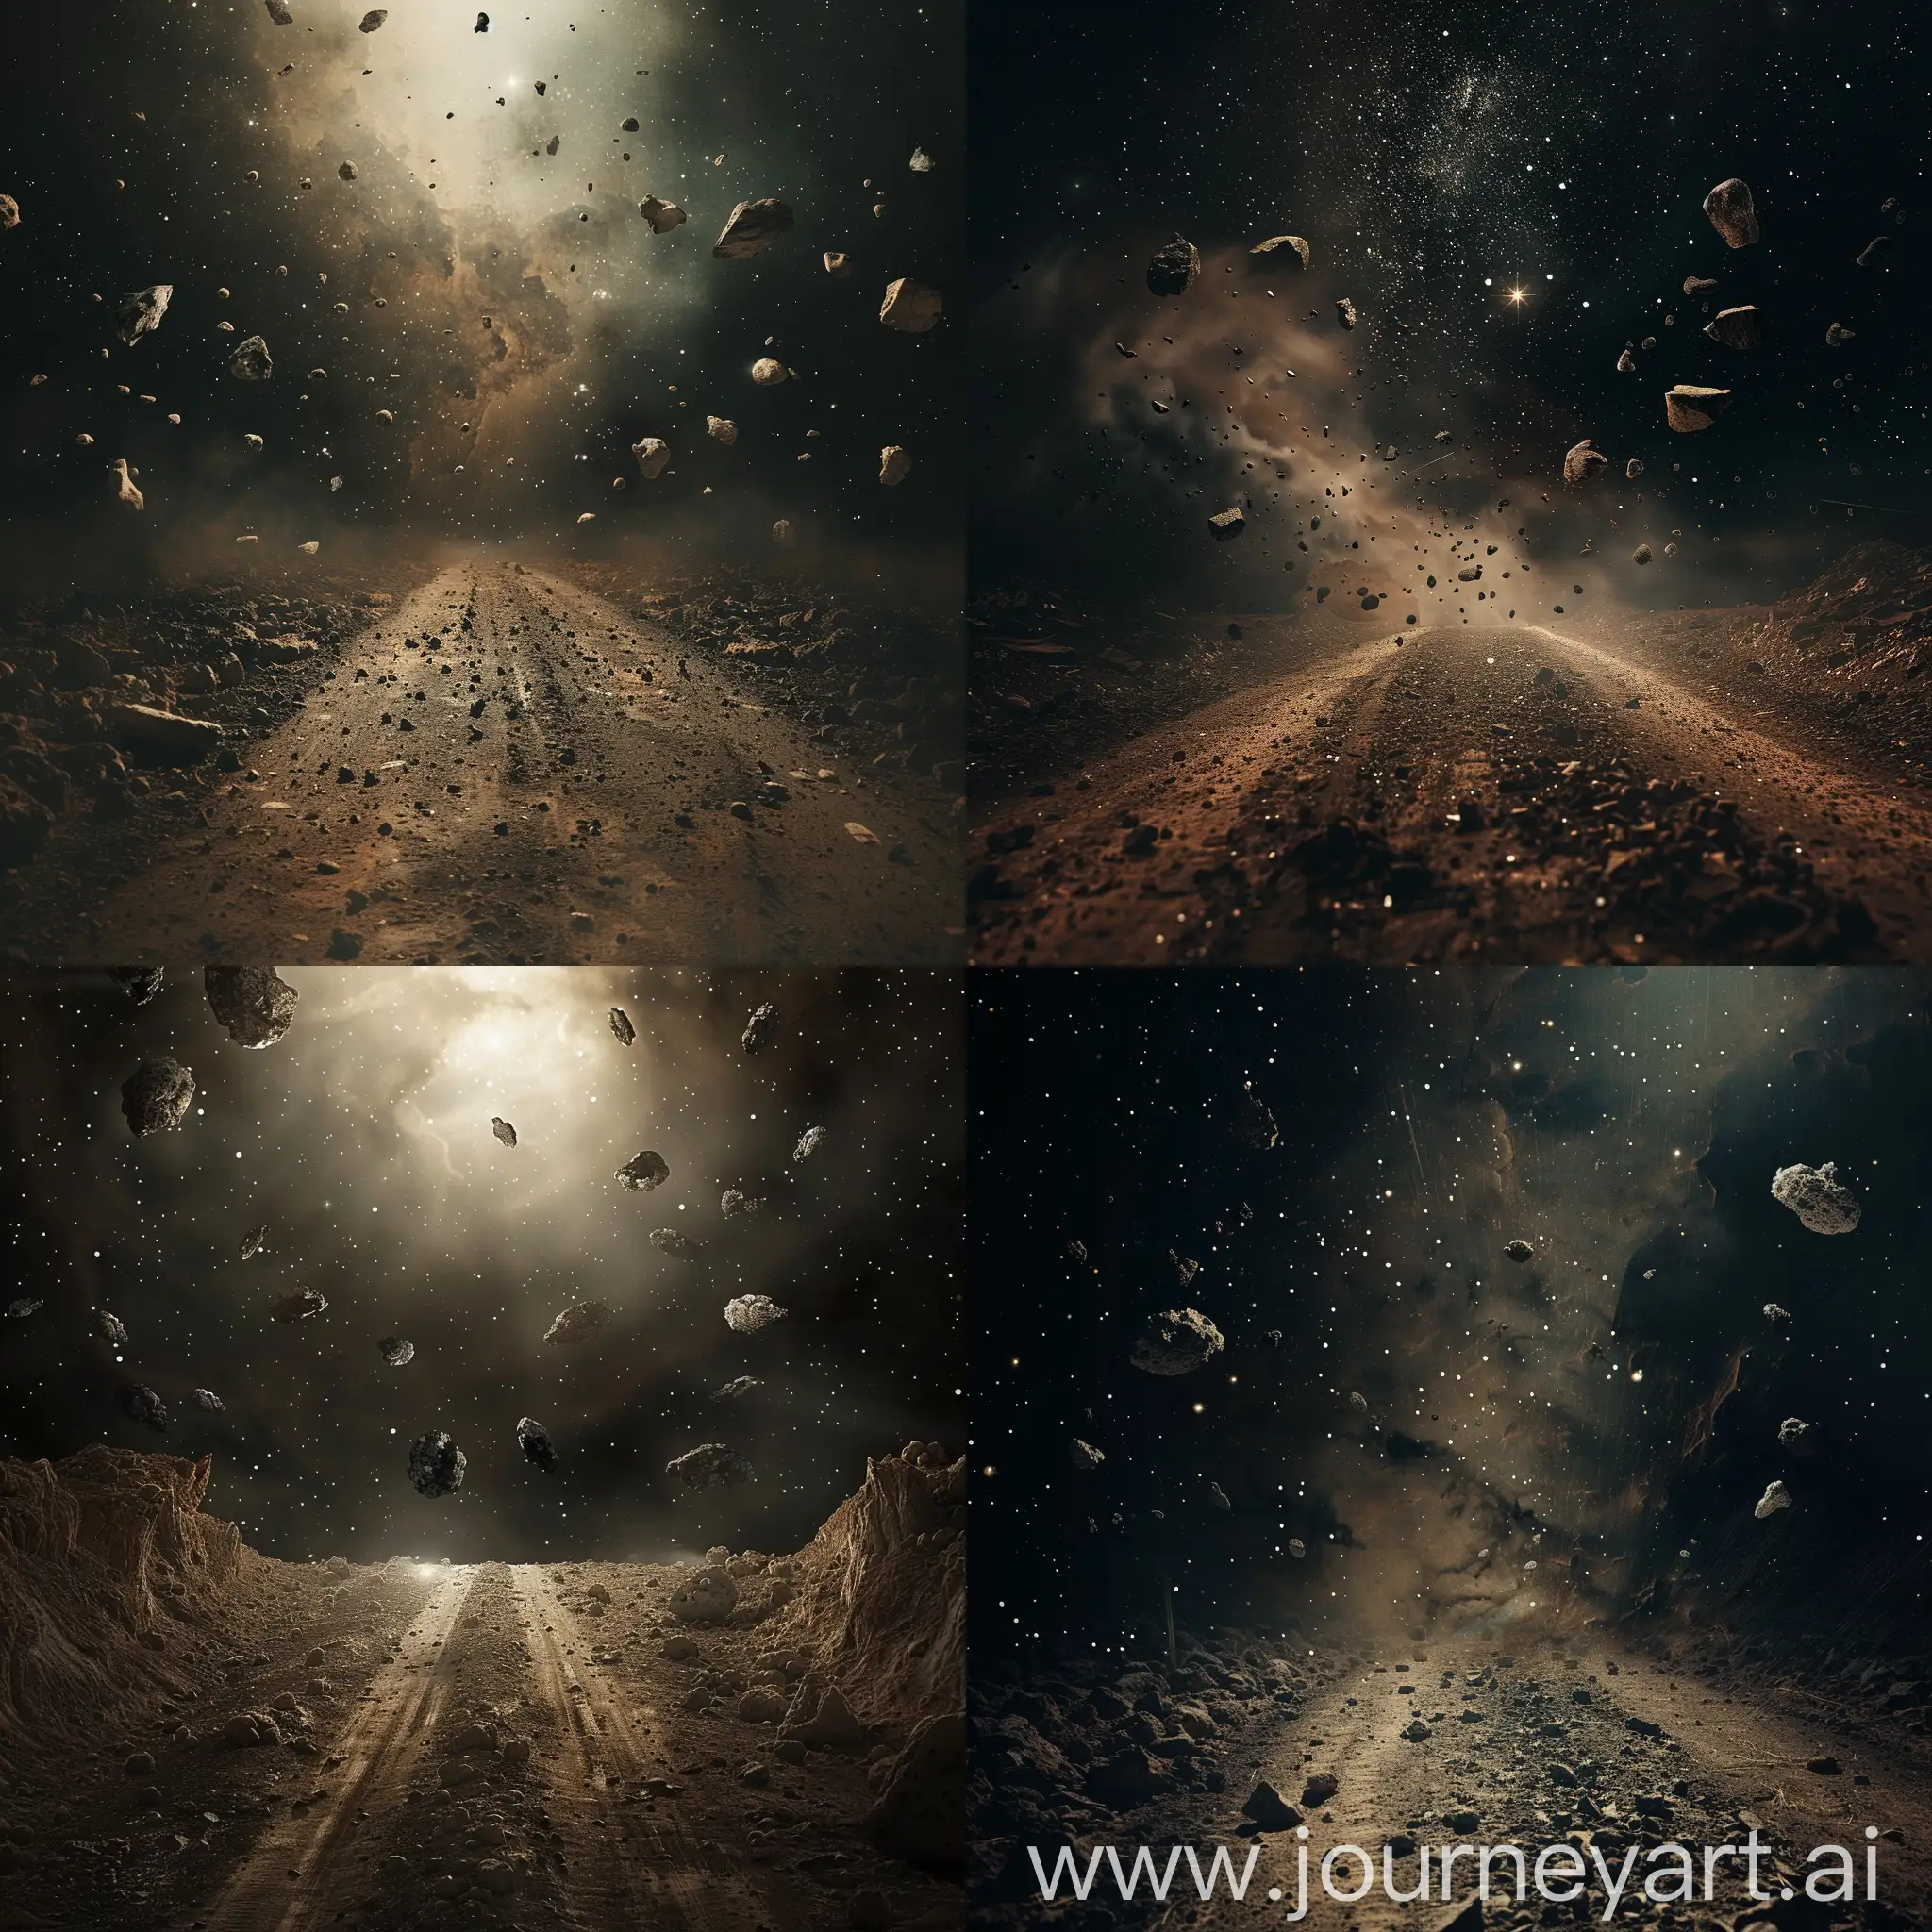 empty space, abyss, dirt road, flying rocks, asteroids, dim lighting, space, small white star